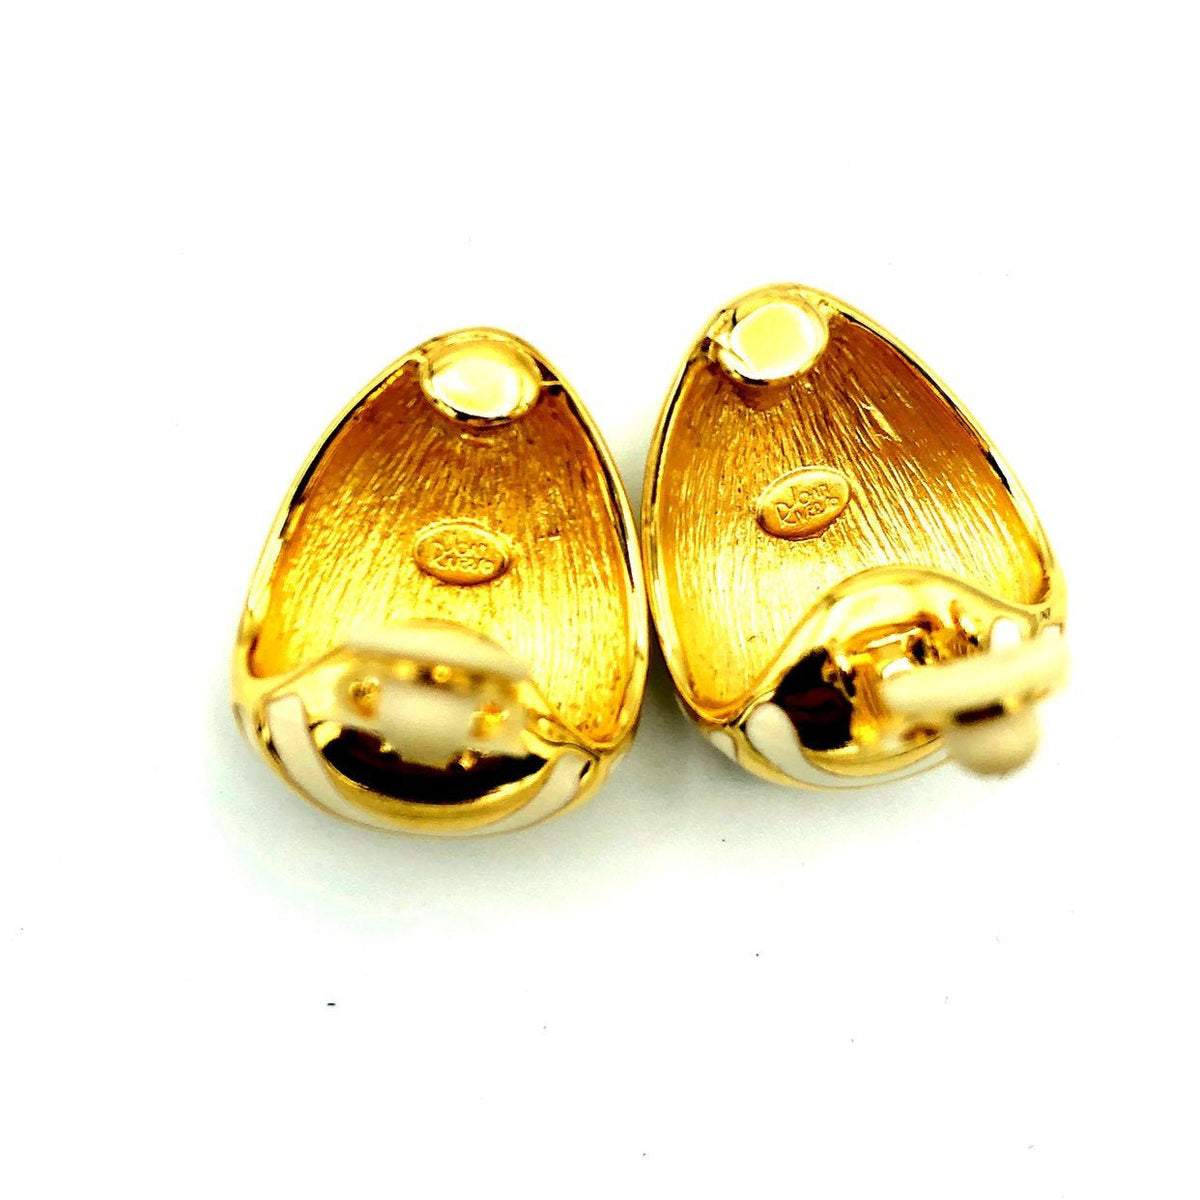 Classic Joan Rivers Gold Animal Print Vintage Clip-On Earrings - 24 Wishes Vintage Jewelry